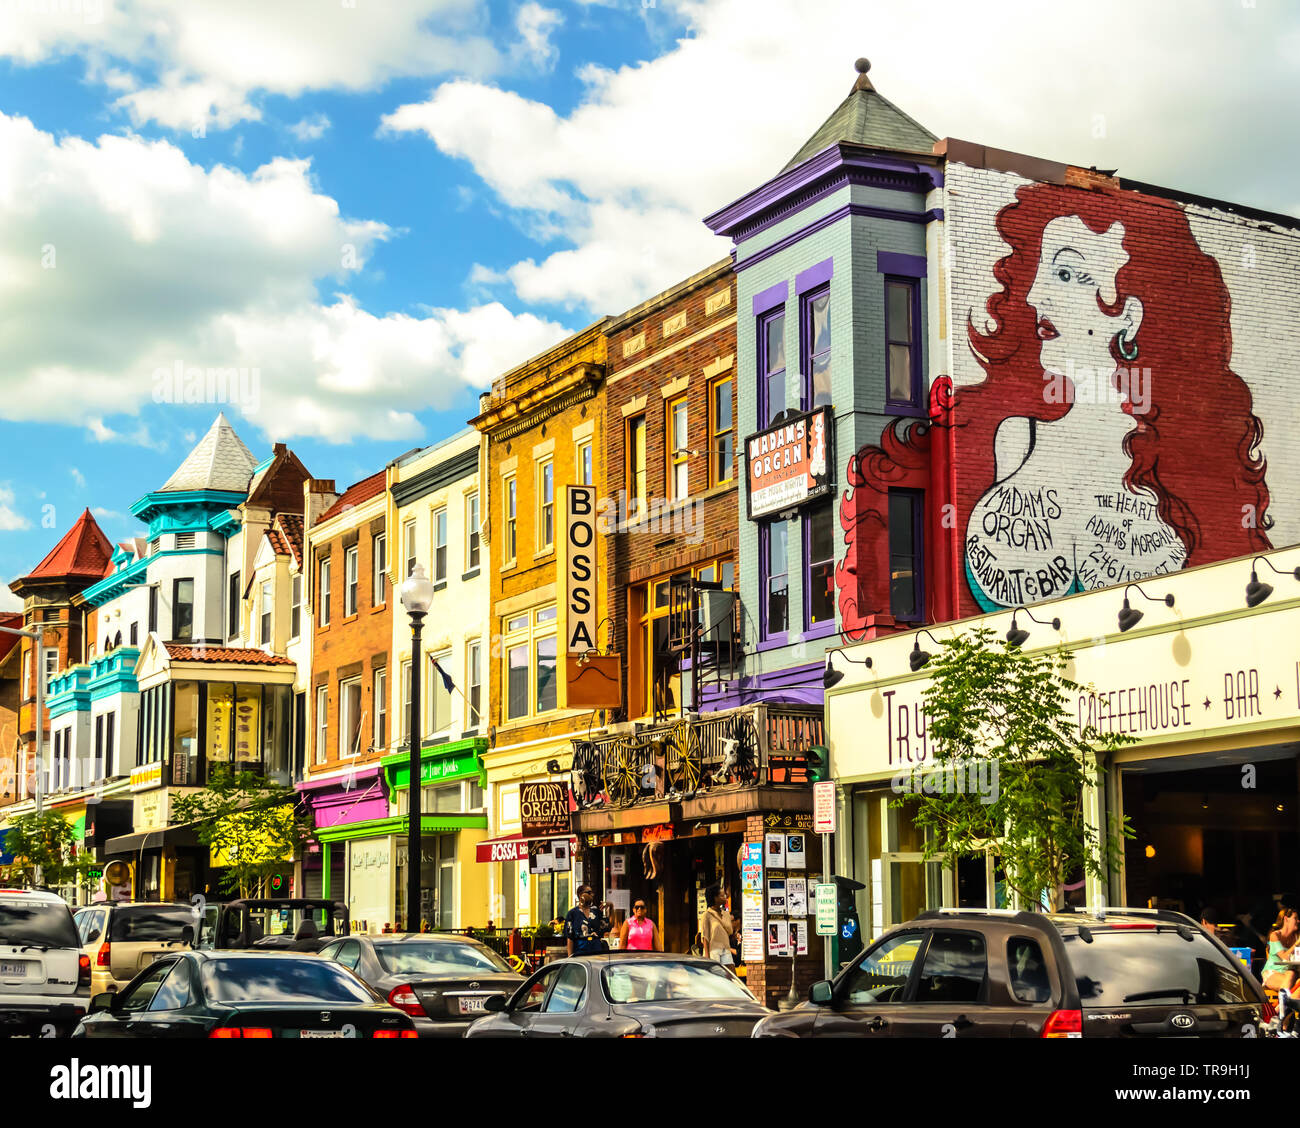 Madam's Organ Restaurant and Bar with mural and surrounding buildings in Washington, DC, USA. Stock Photo